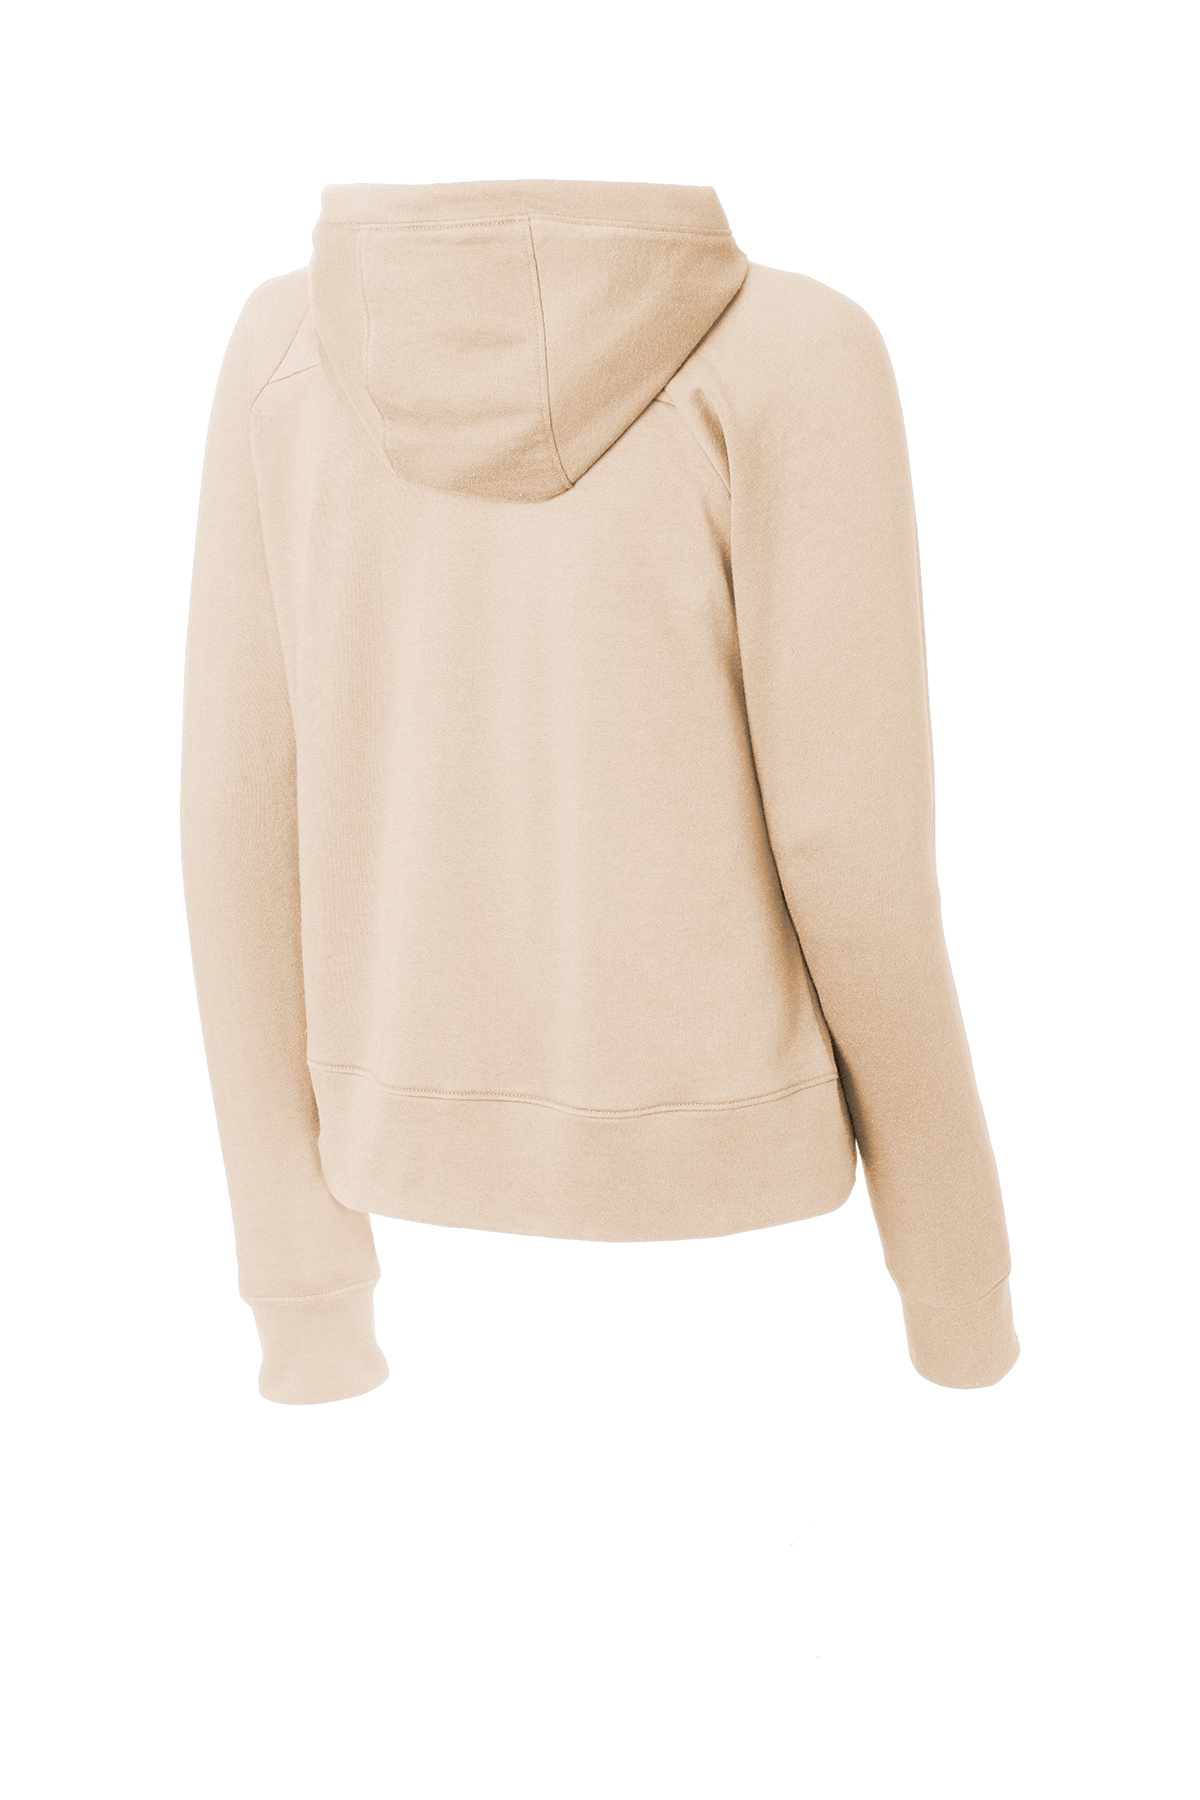 Sport-Tek Ladies Lightweight French Terry Pullover Hoodie | Product ...